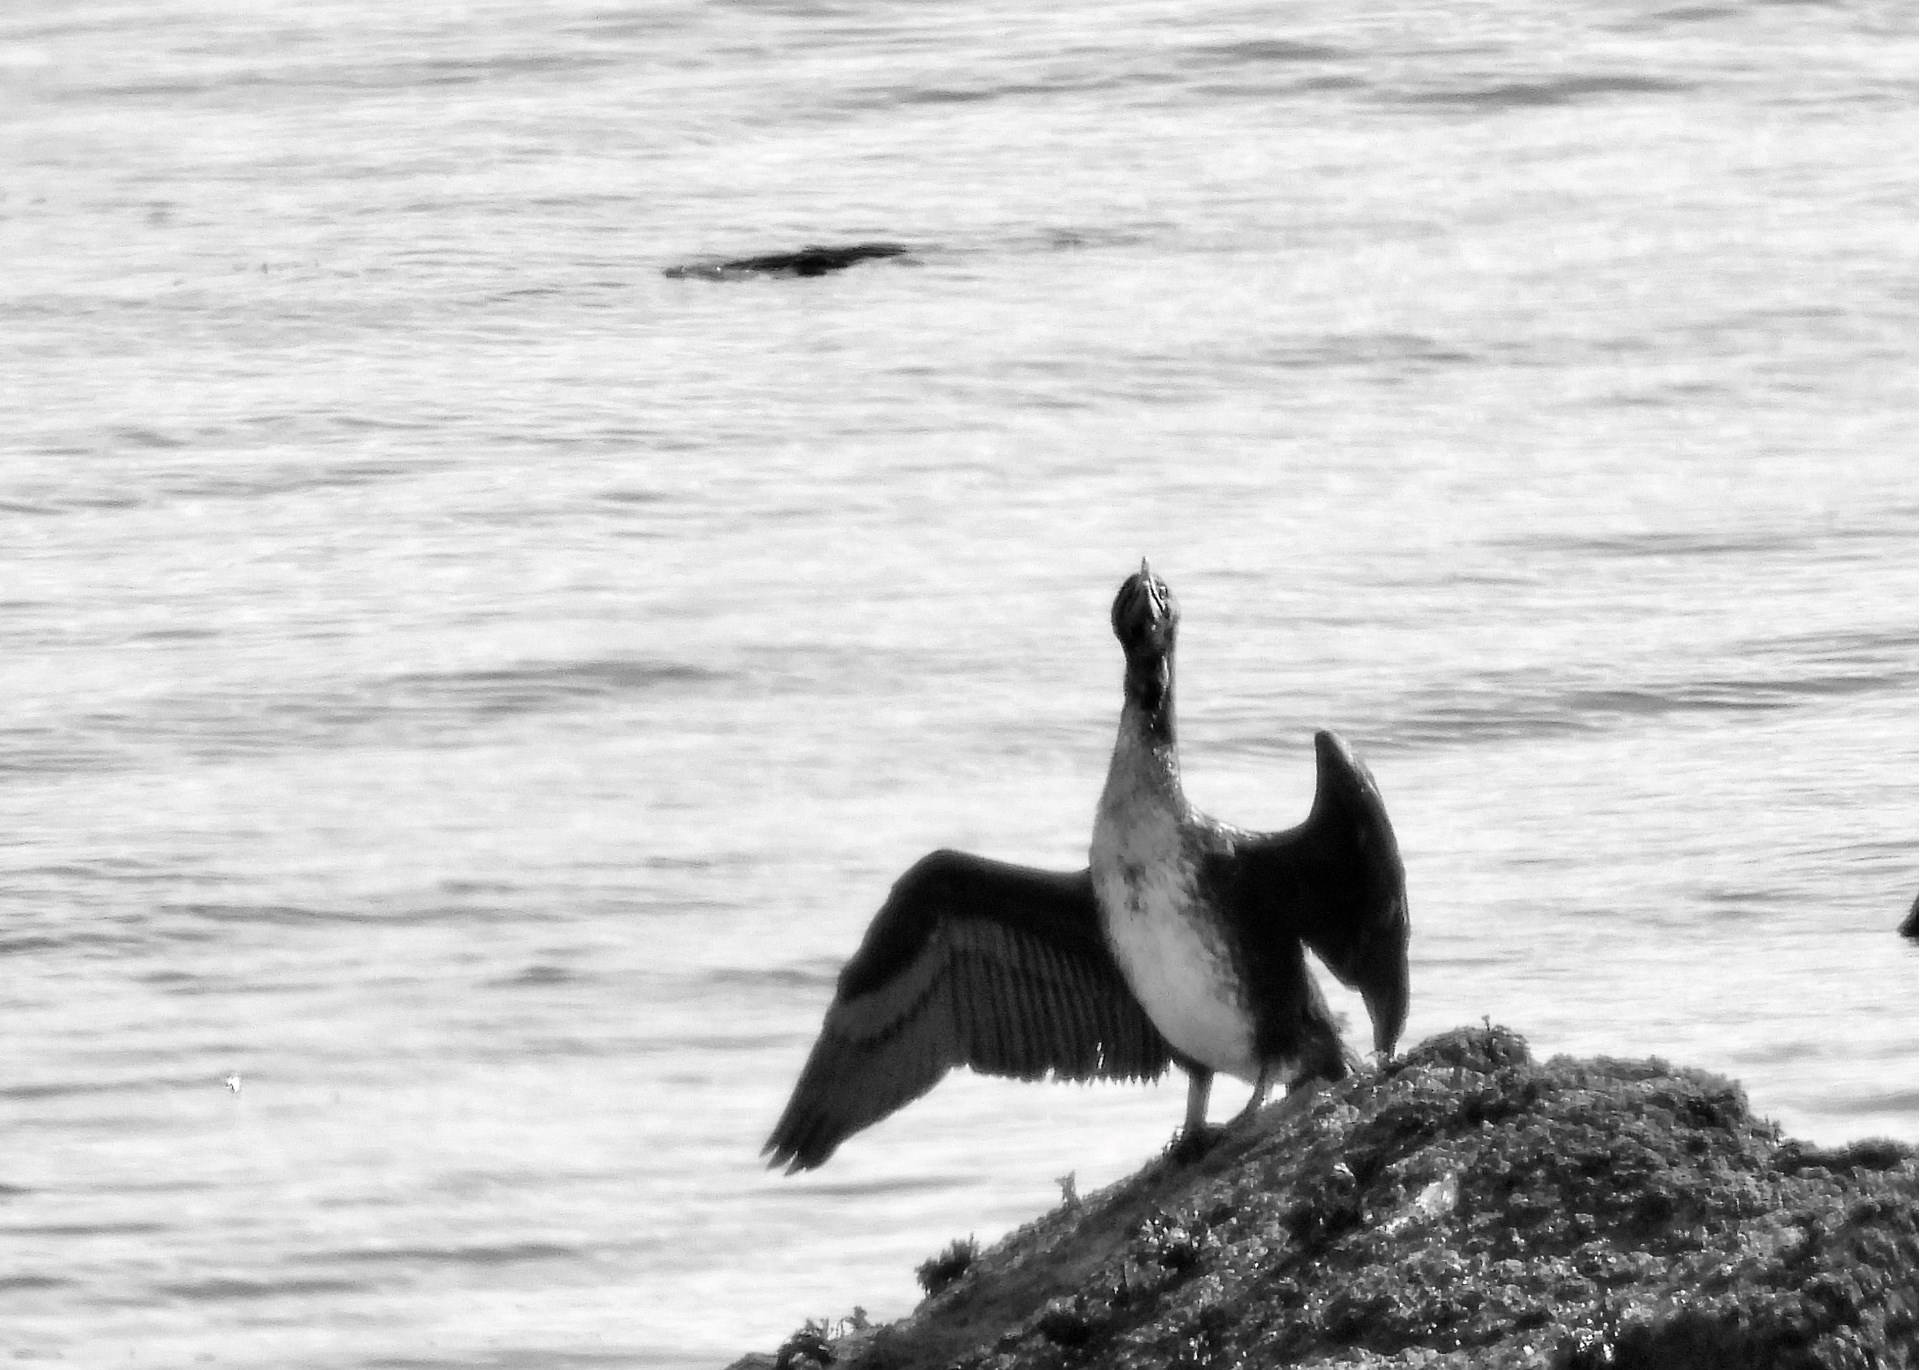 Cormorant in a typical pose – drying out